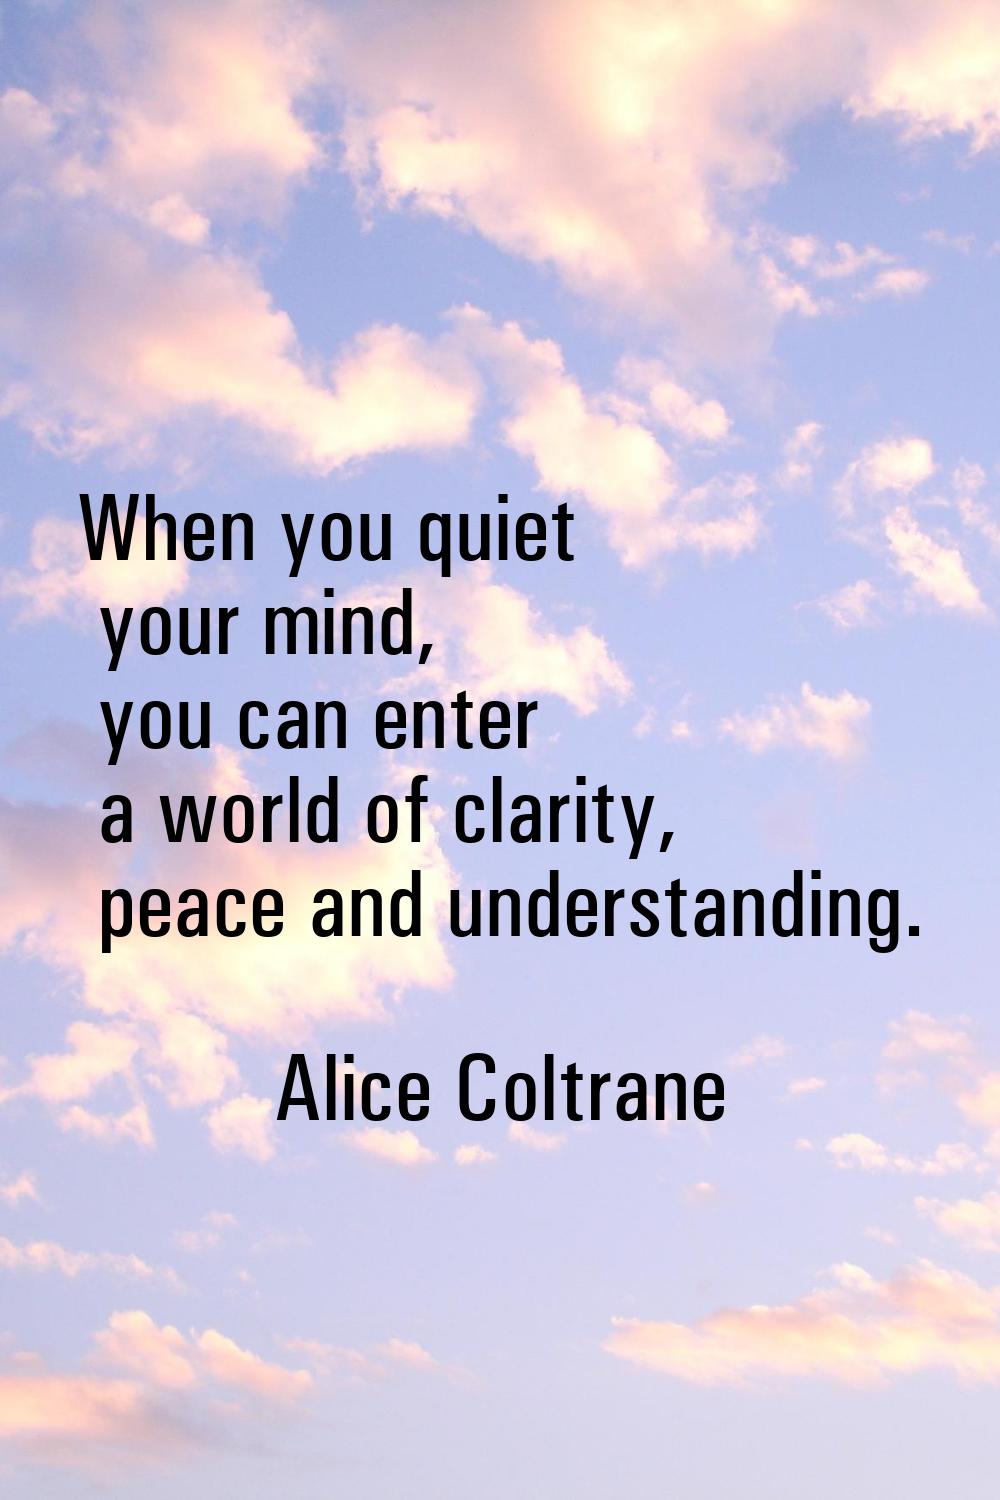 When you quiet your mind, you can enter a world of clarity, peace and understanding.